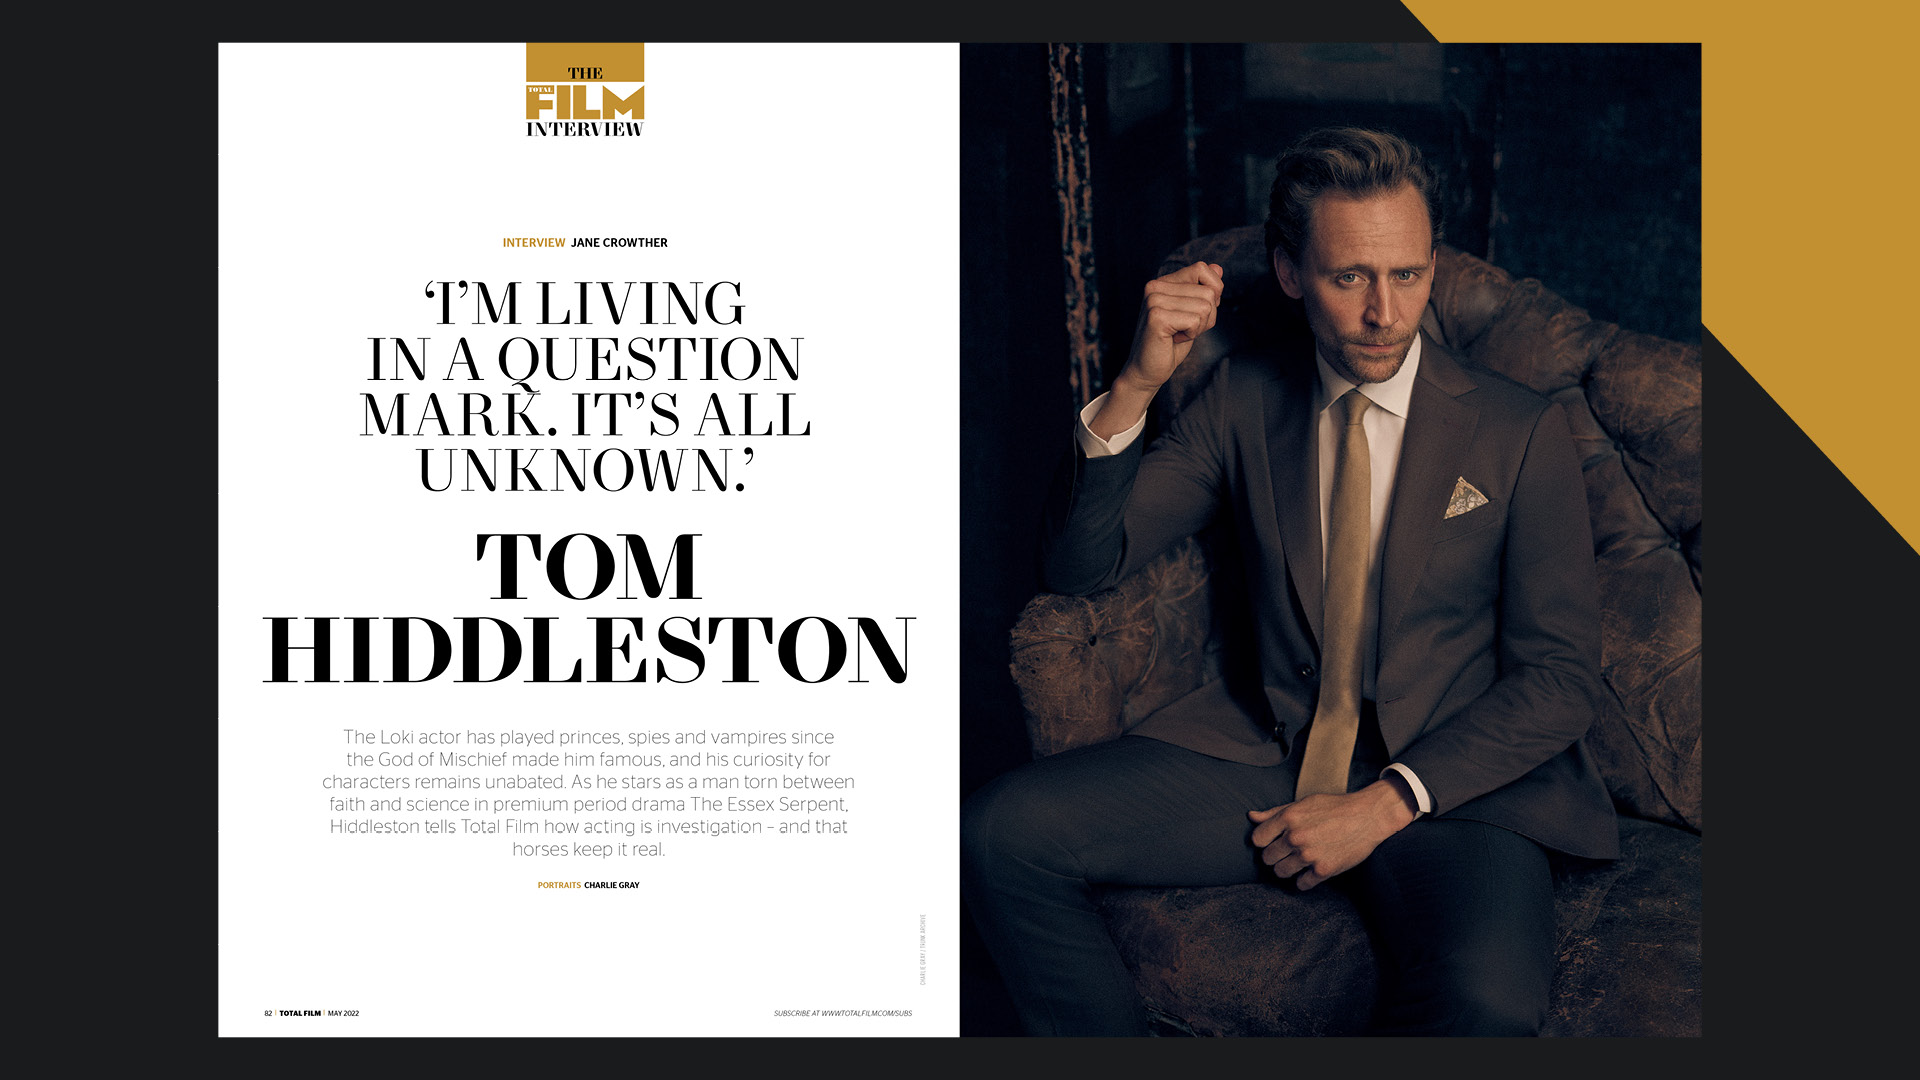 Interview with Tom Hiddleston at Total Film